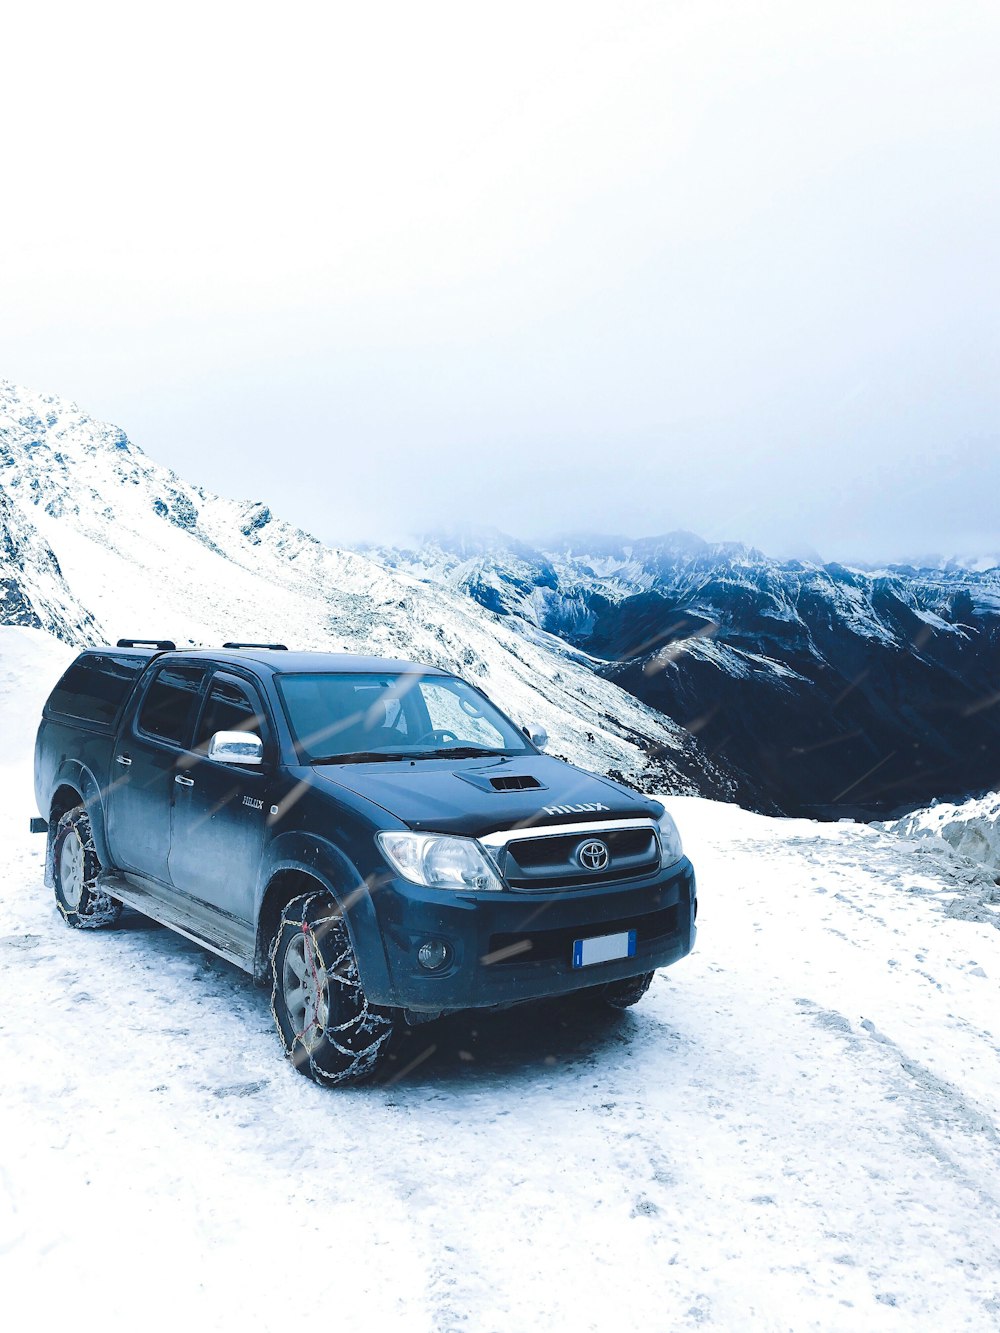 black Toyota pickup truck on snow capped mountain during daytime